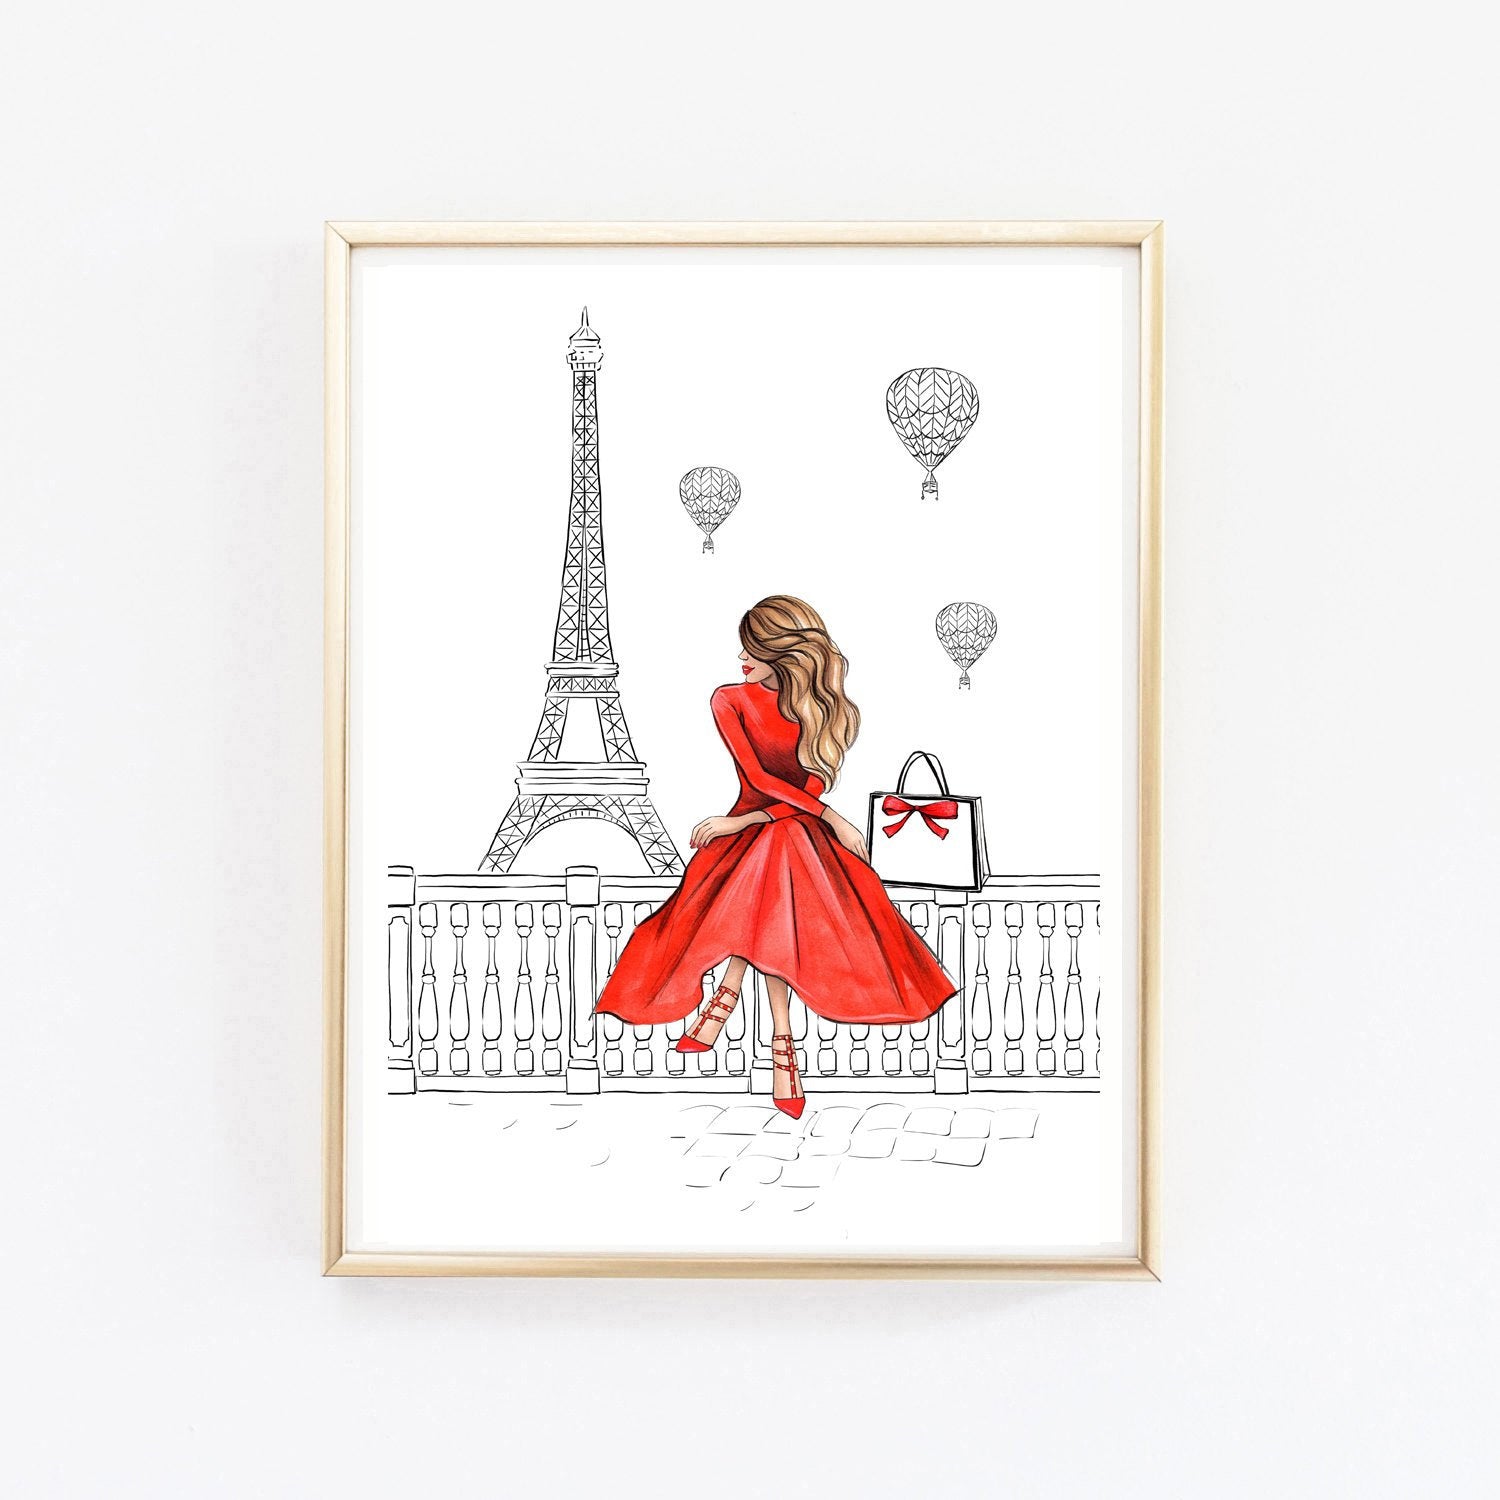 Lady in red in Paris art print fashion illustration